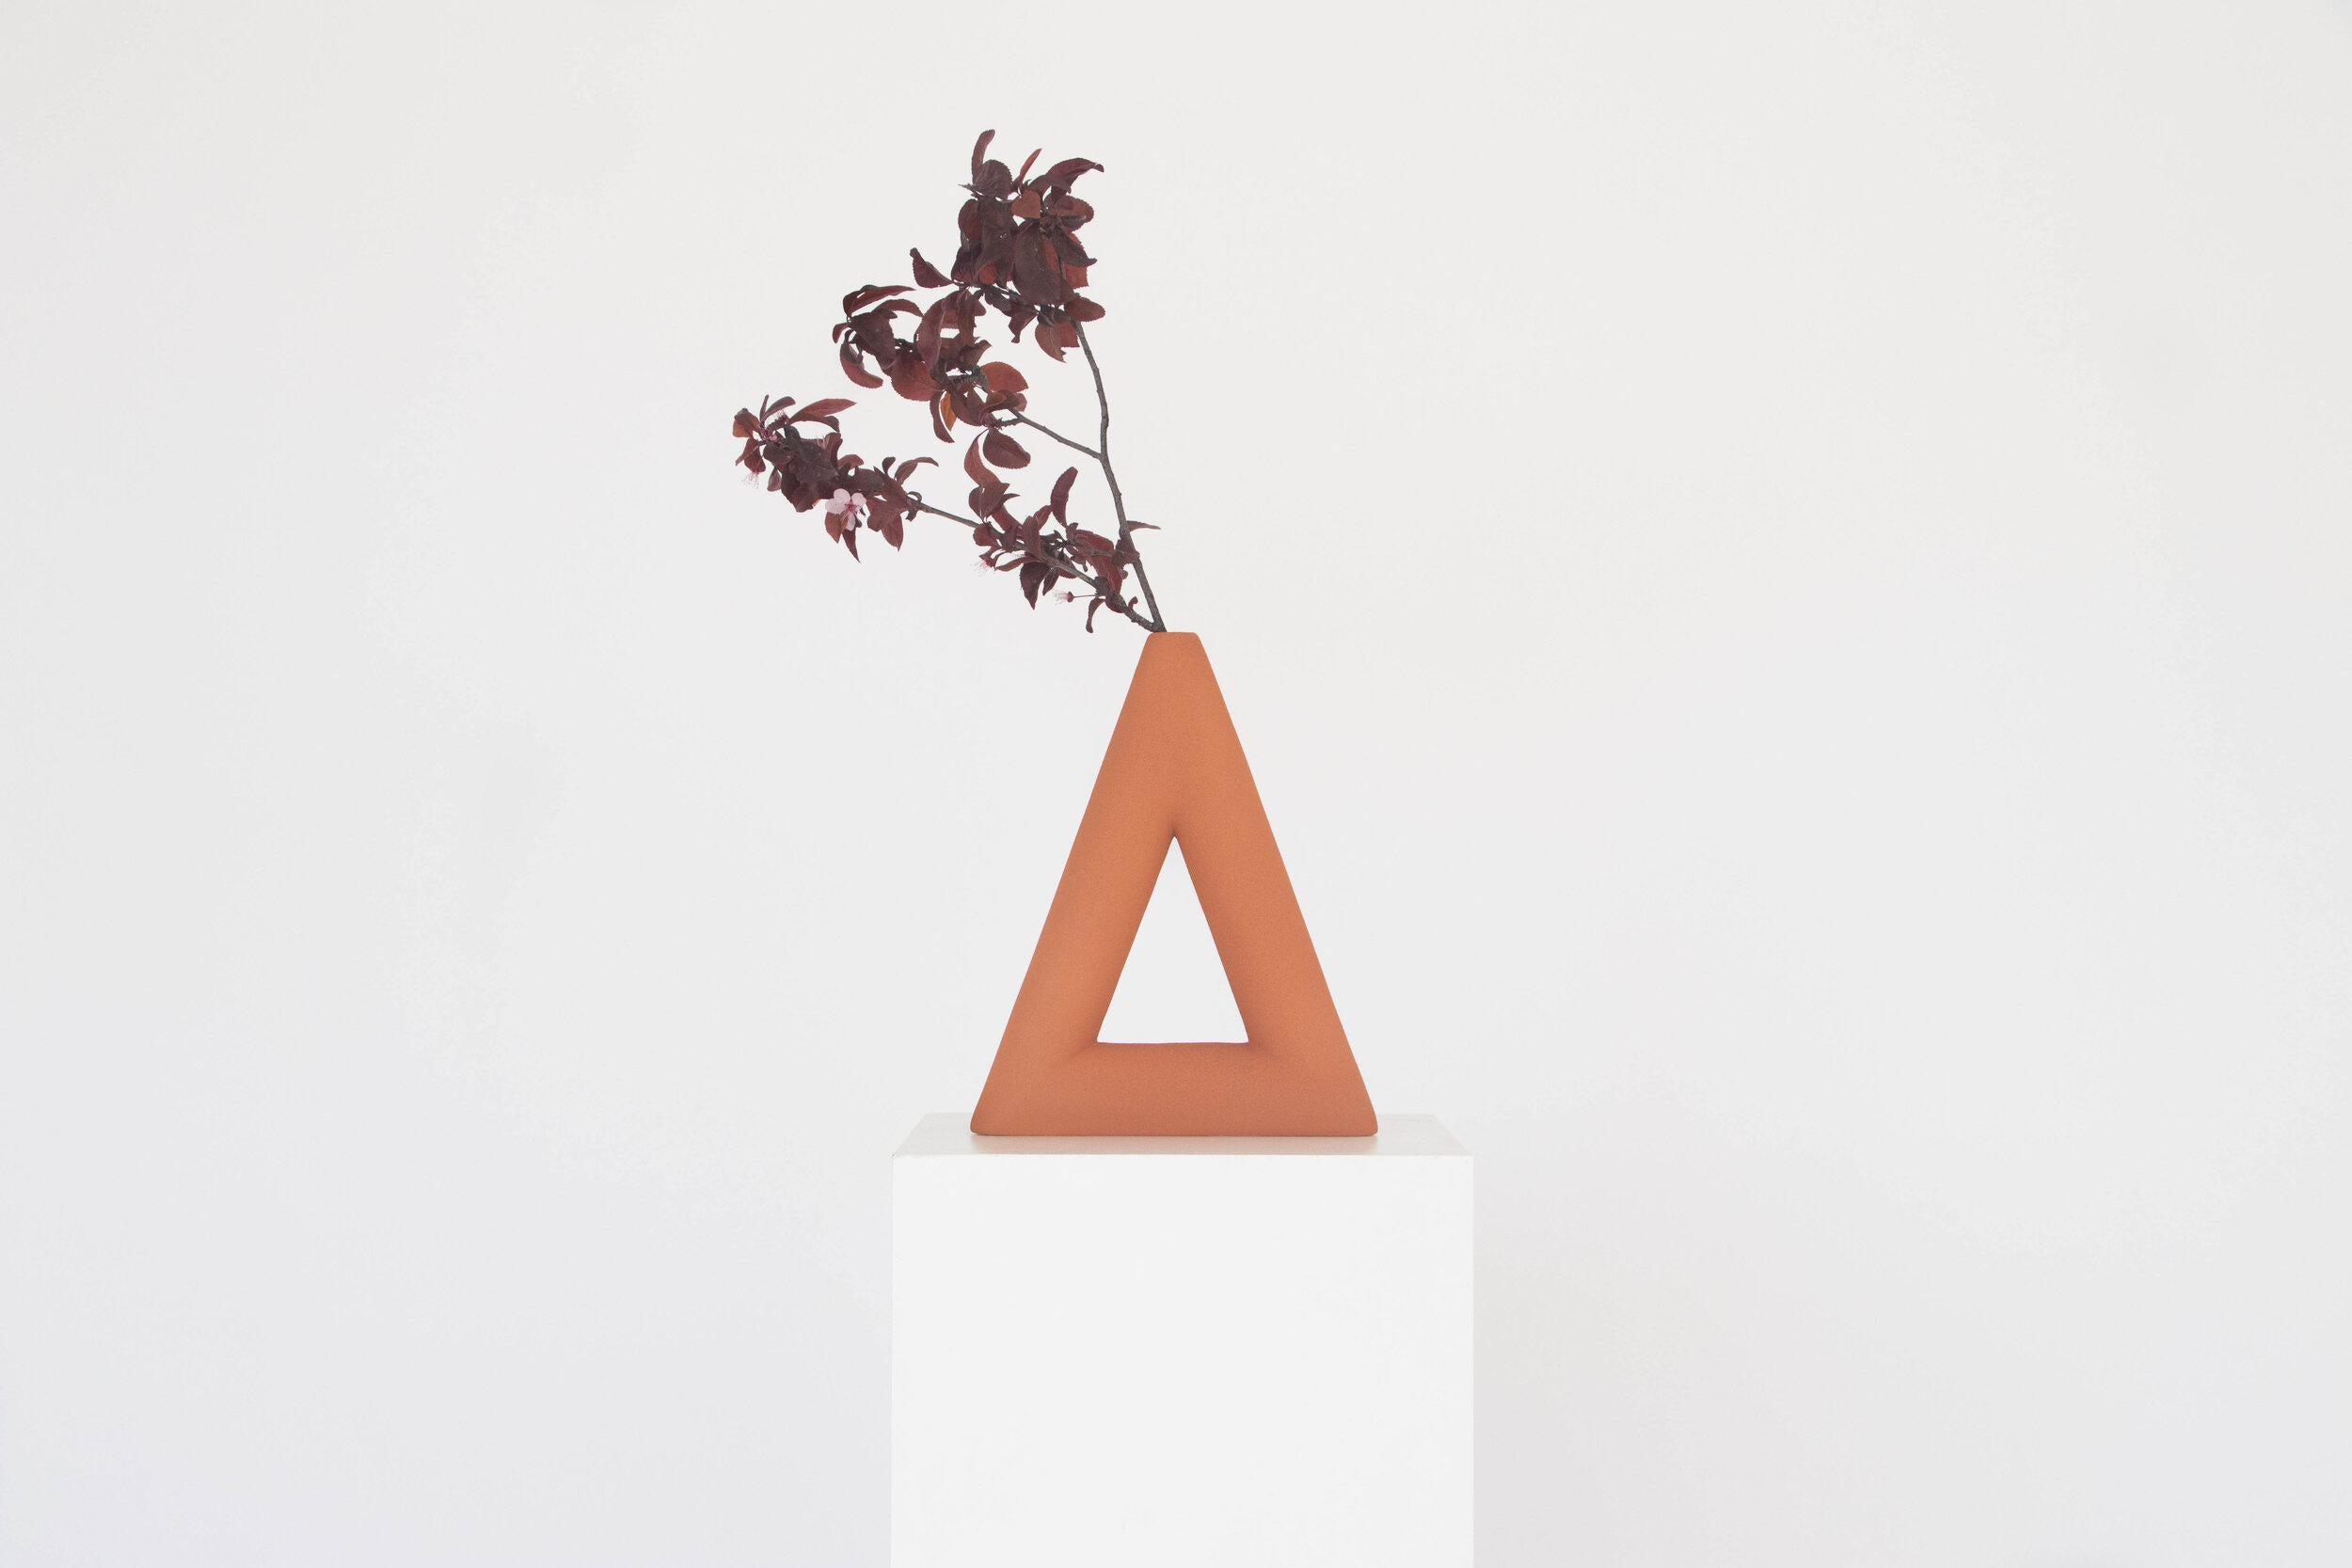 A set of 8 terracotta triangle matt vases by Valeria Vasi
Handmade in Barcelona, 2021
Materials: stoneware, clay
Dimensions: 34 x 28 x 5 cm
Also available in: baby blue, white. 

A sculptural stoneware vase entirely crafted in Barcelona by